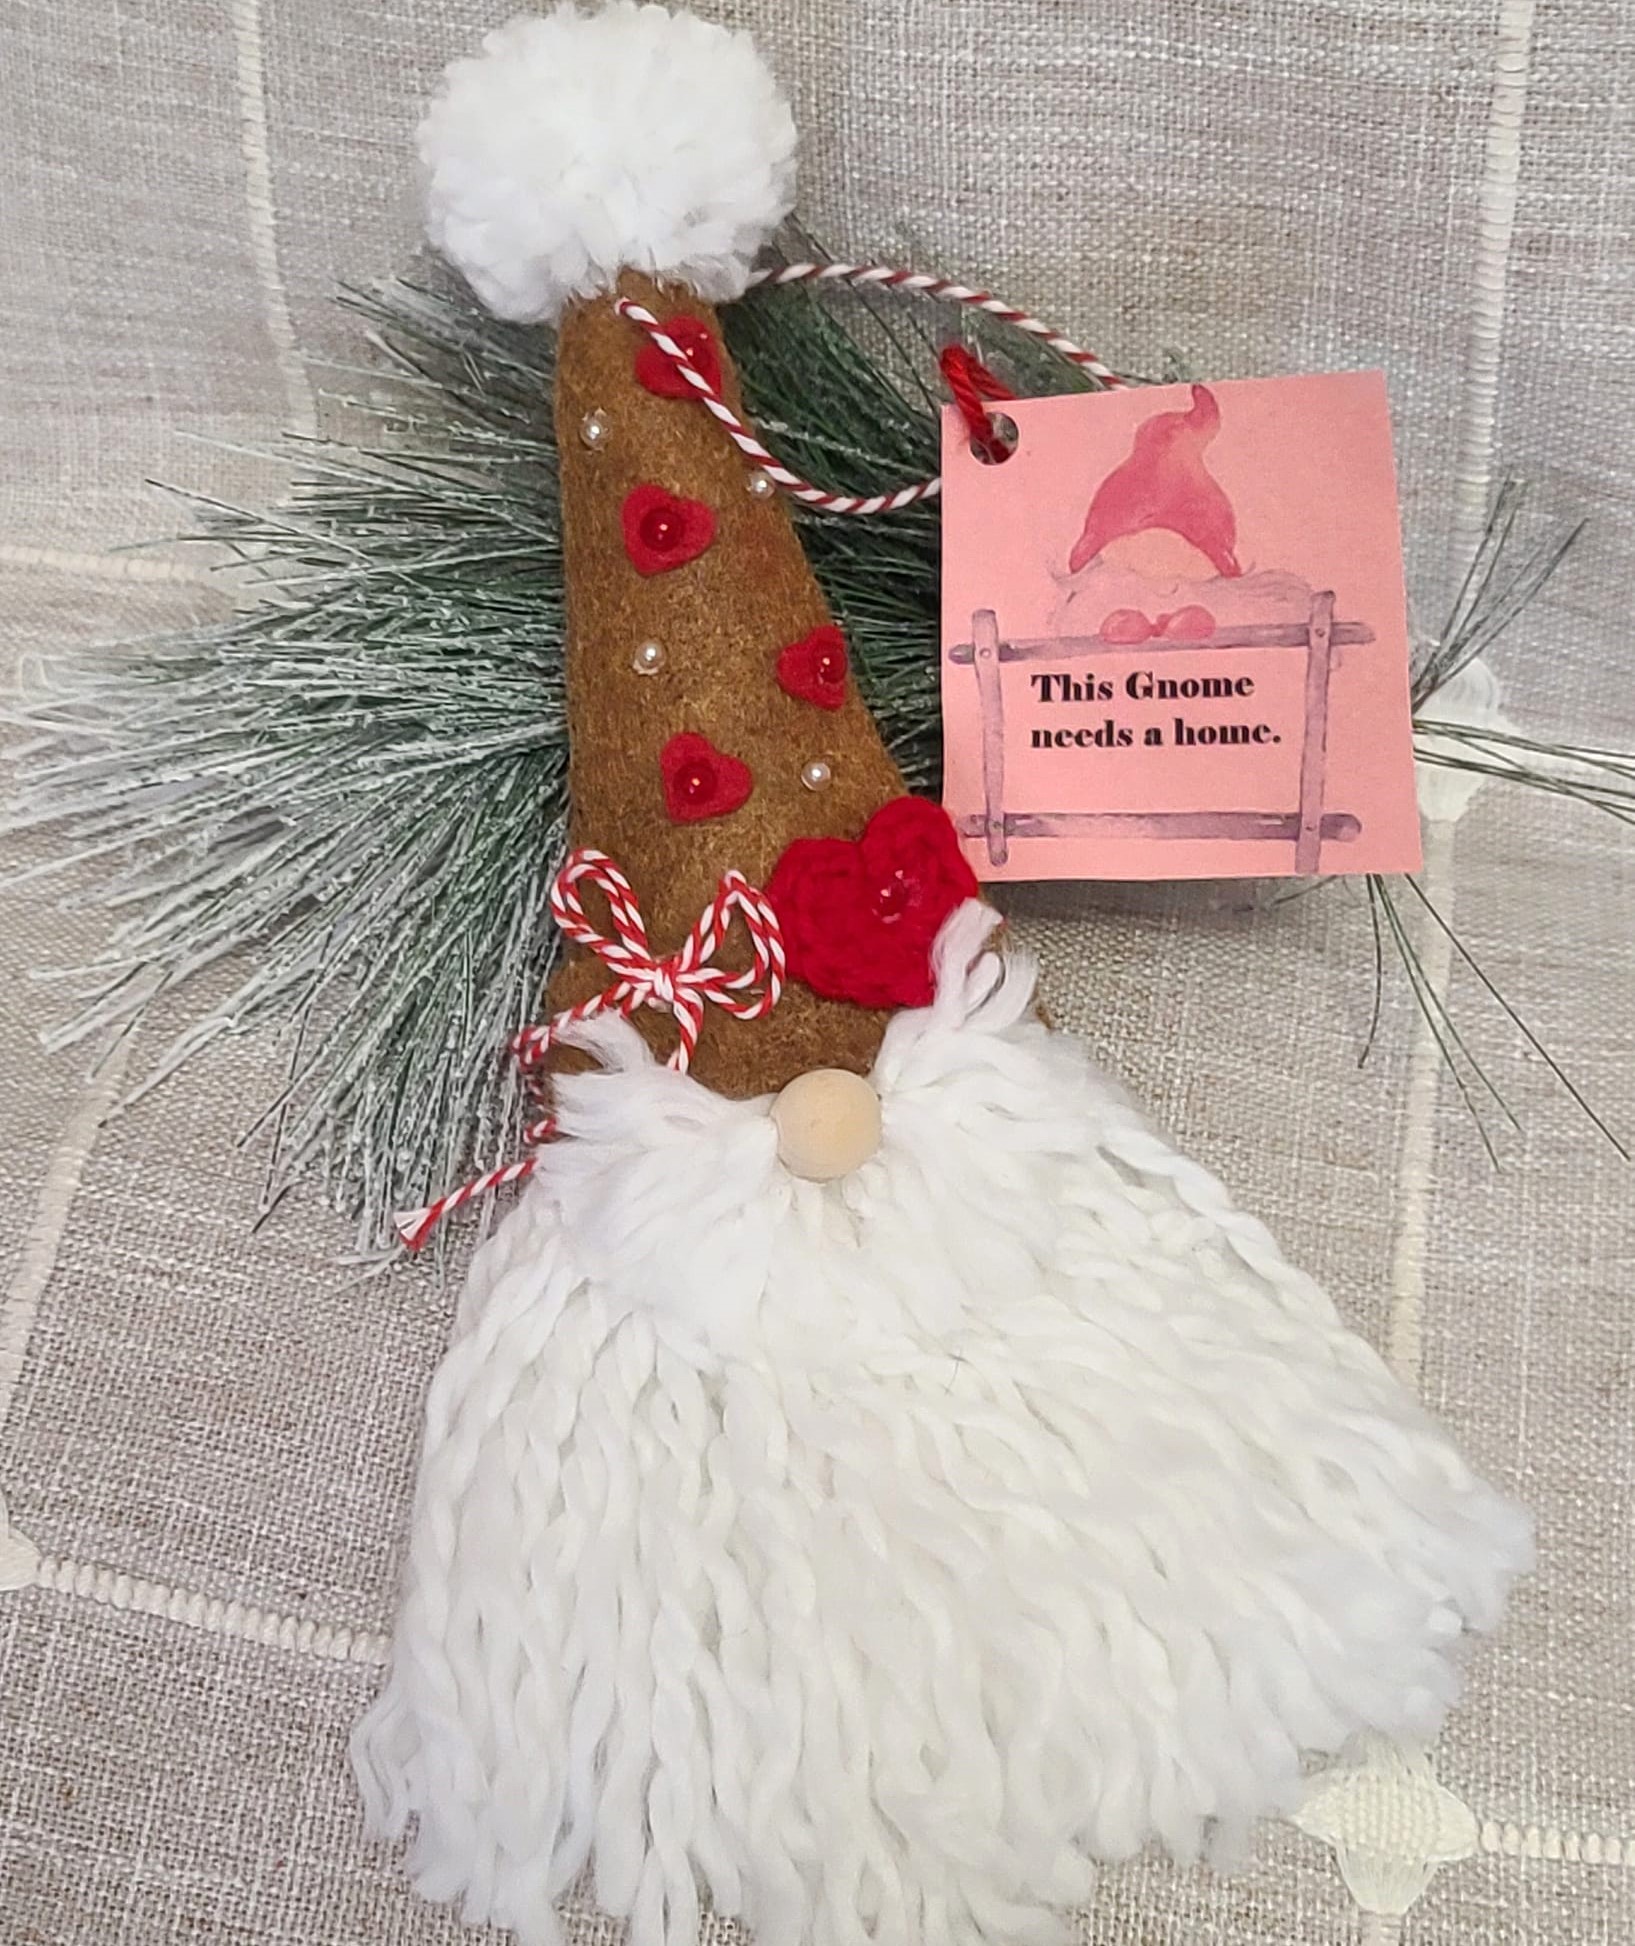 Gnome Christmas felt ornament gingerbread hat with white beard